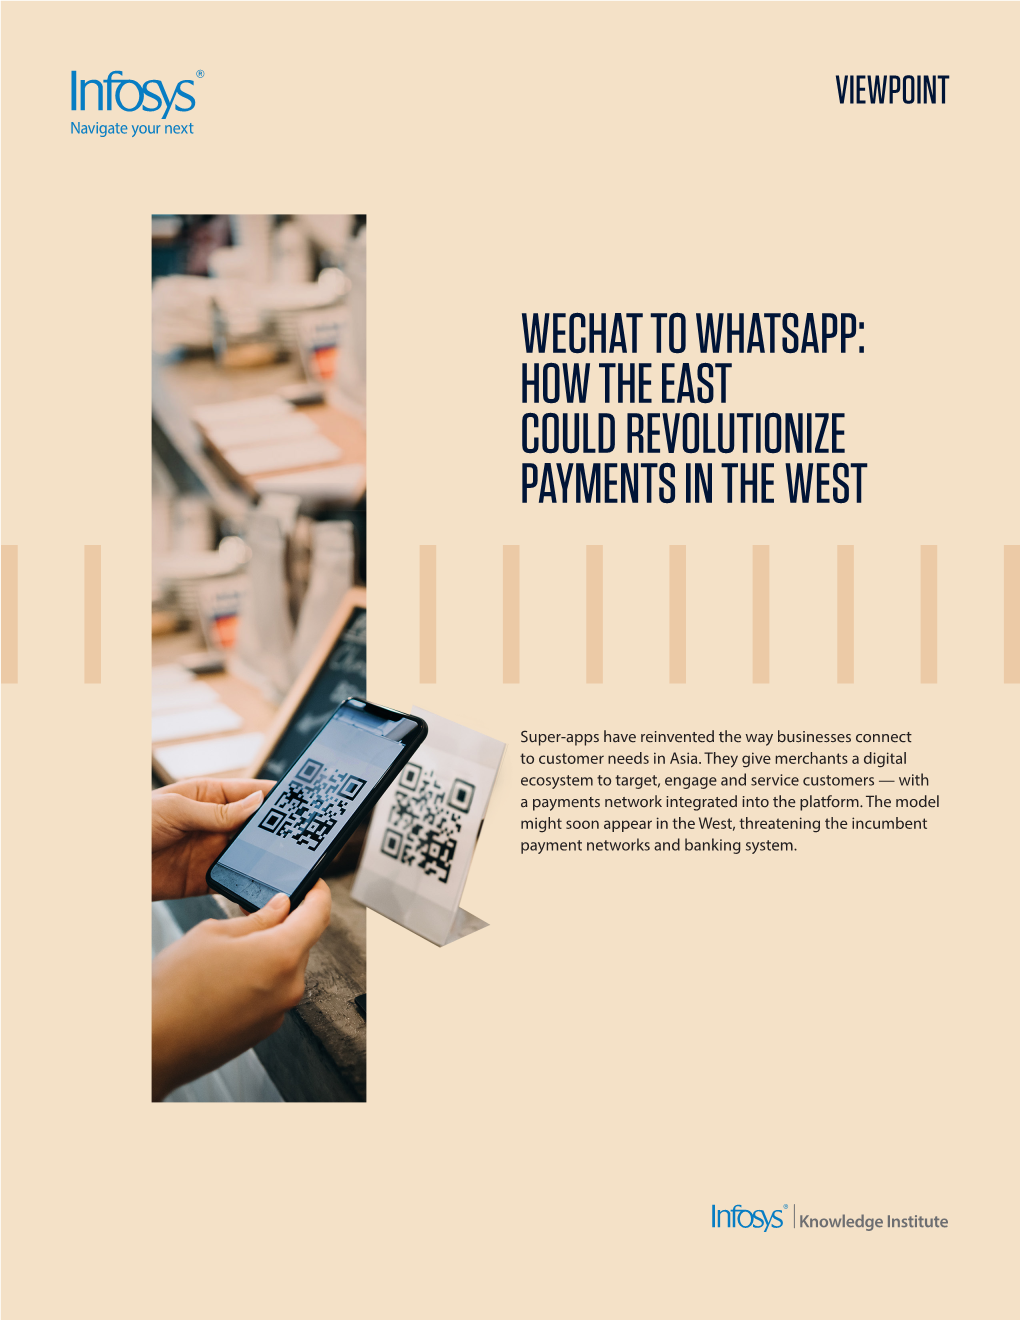 Wechat to Whatsapp: How the East Could Revolutionize Payments in the West